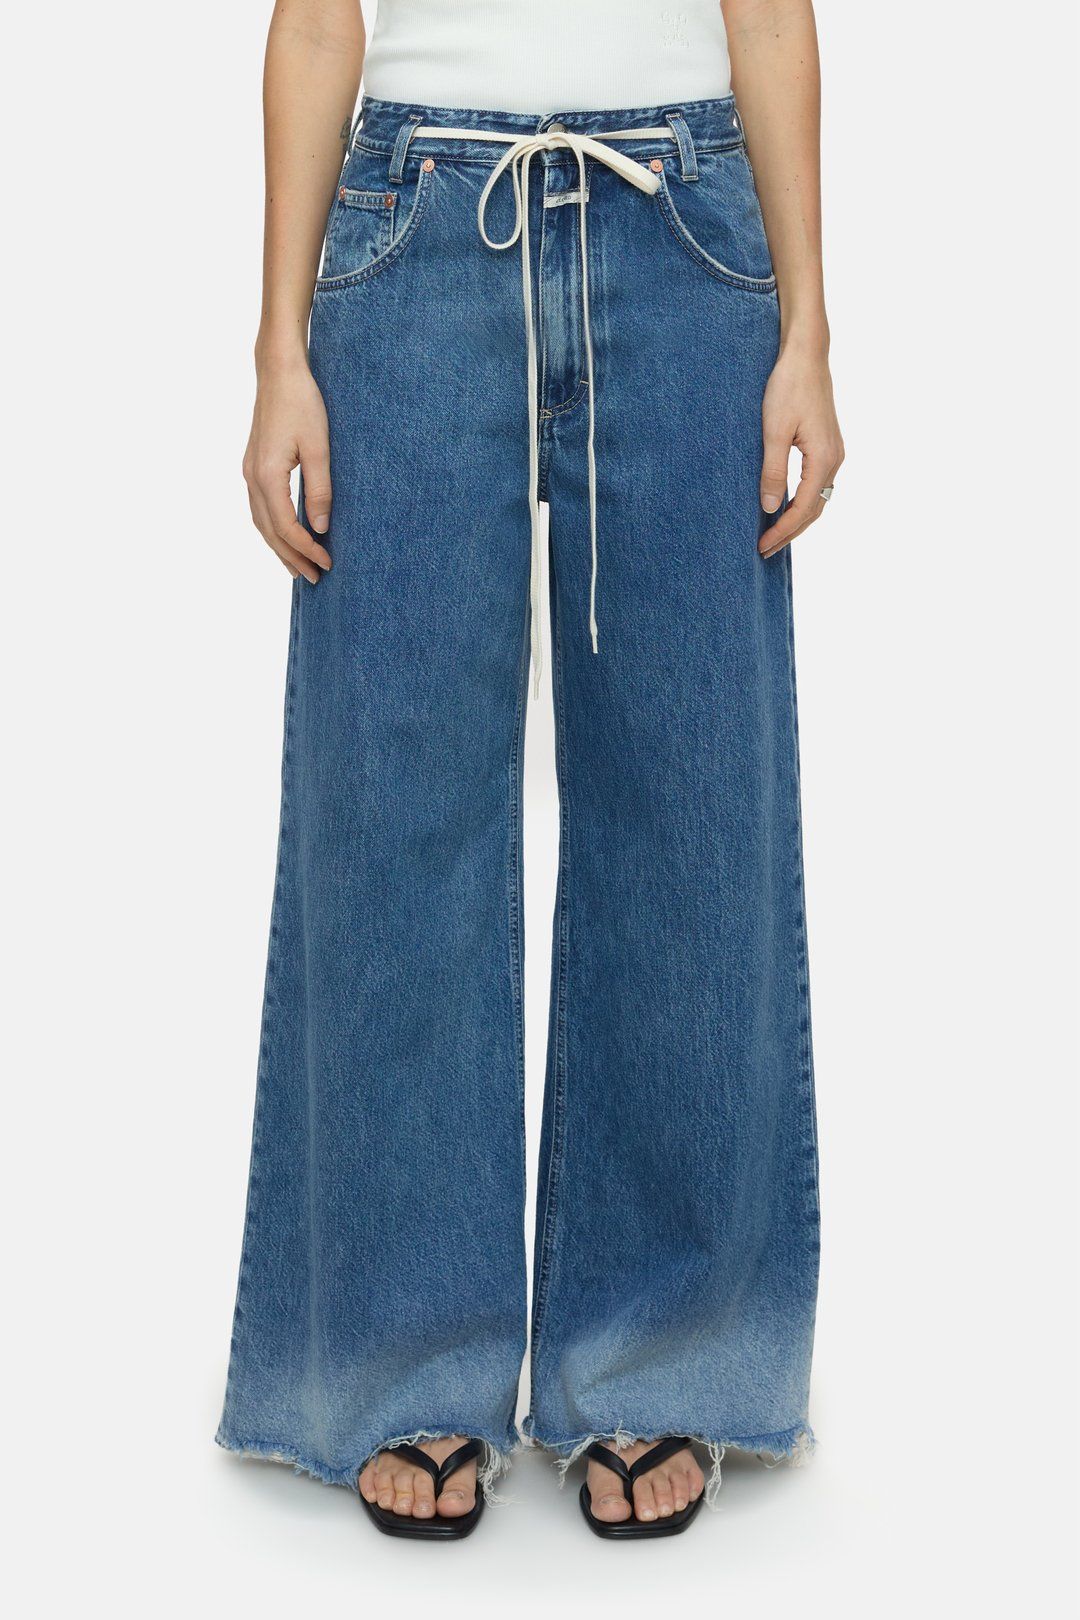 Wide Jeans - Style Name Morus | Closed